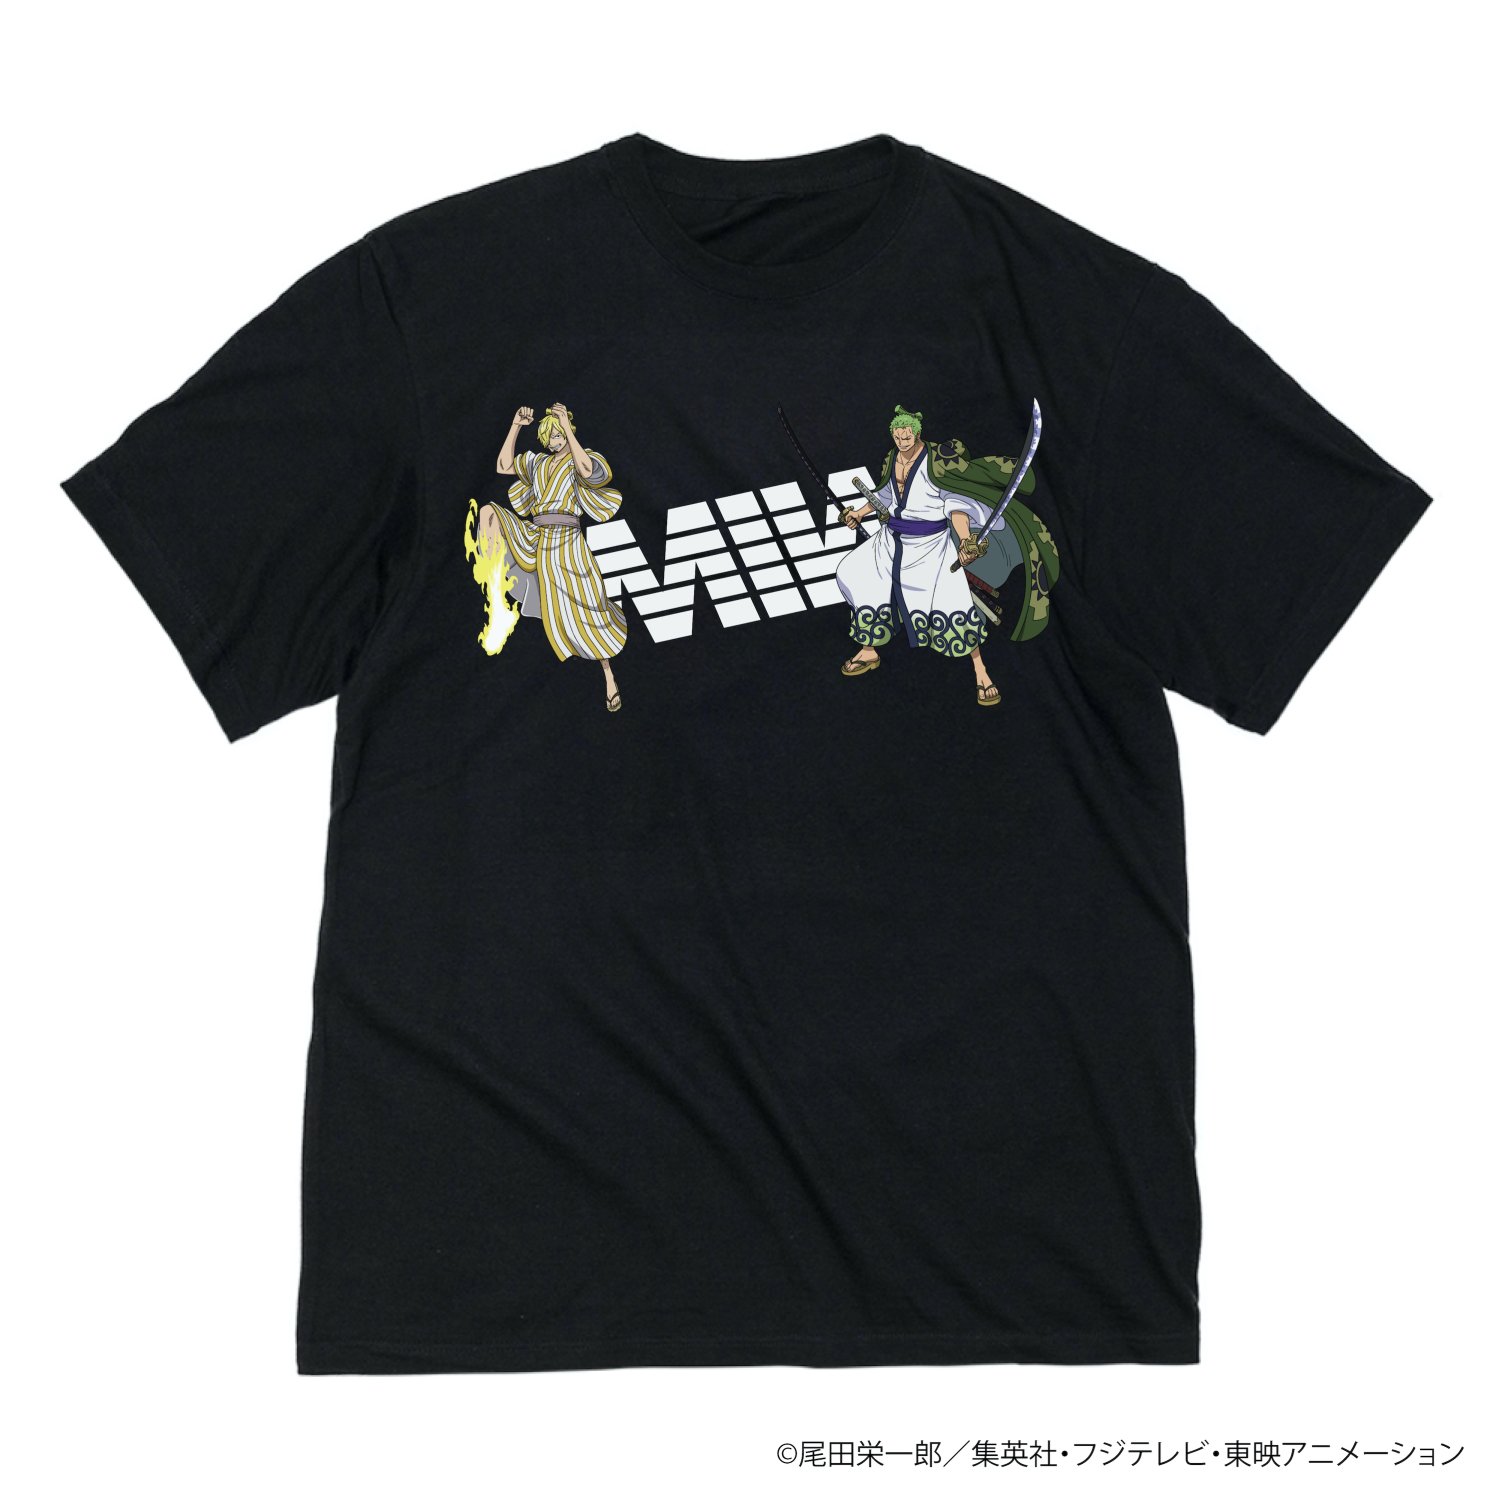 MIW × ONE PIECE - MADE IN WORLD｜公式通販サイト